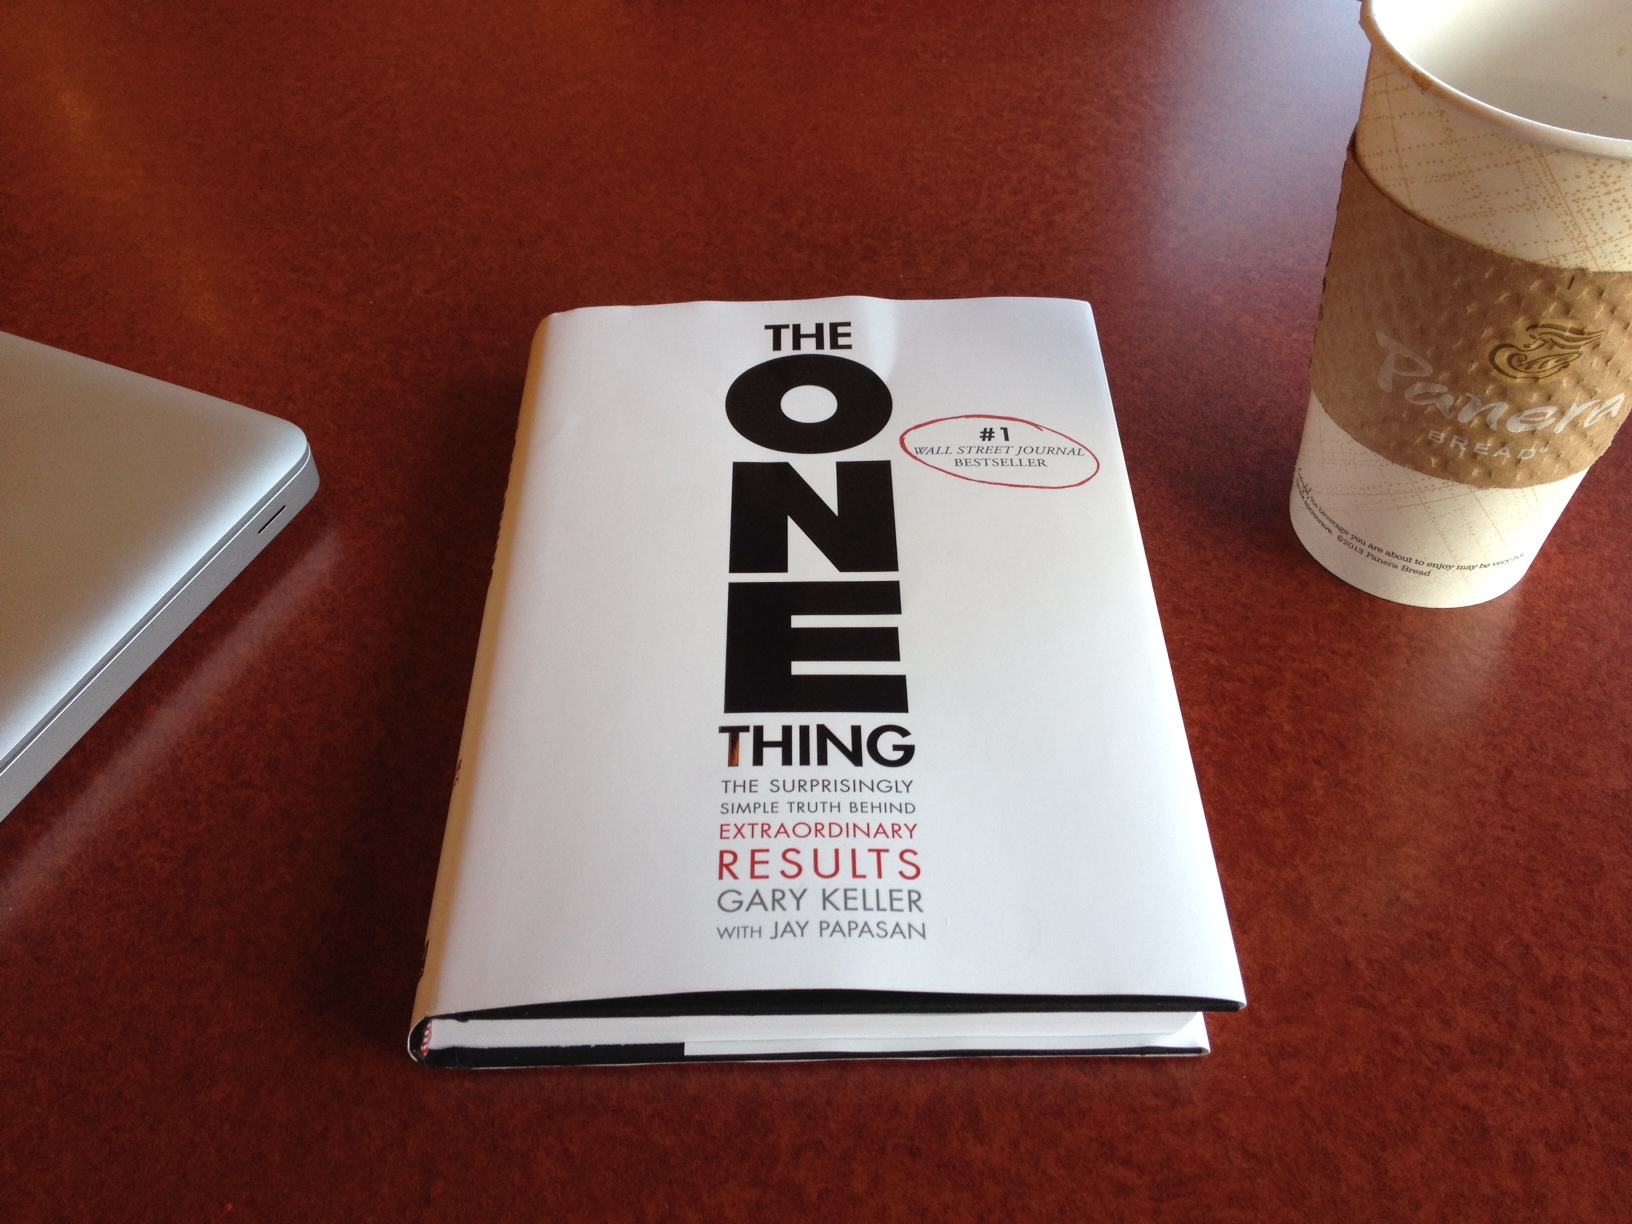 Top 28 Quotes from Gary Keller’s book “The ONE Thing”